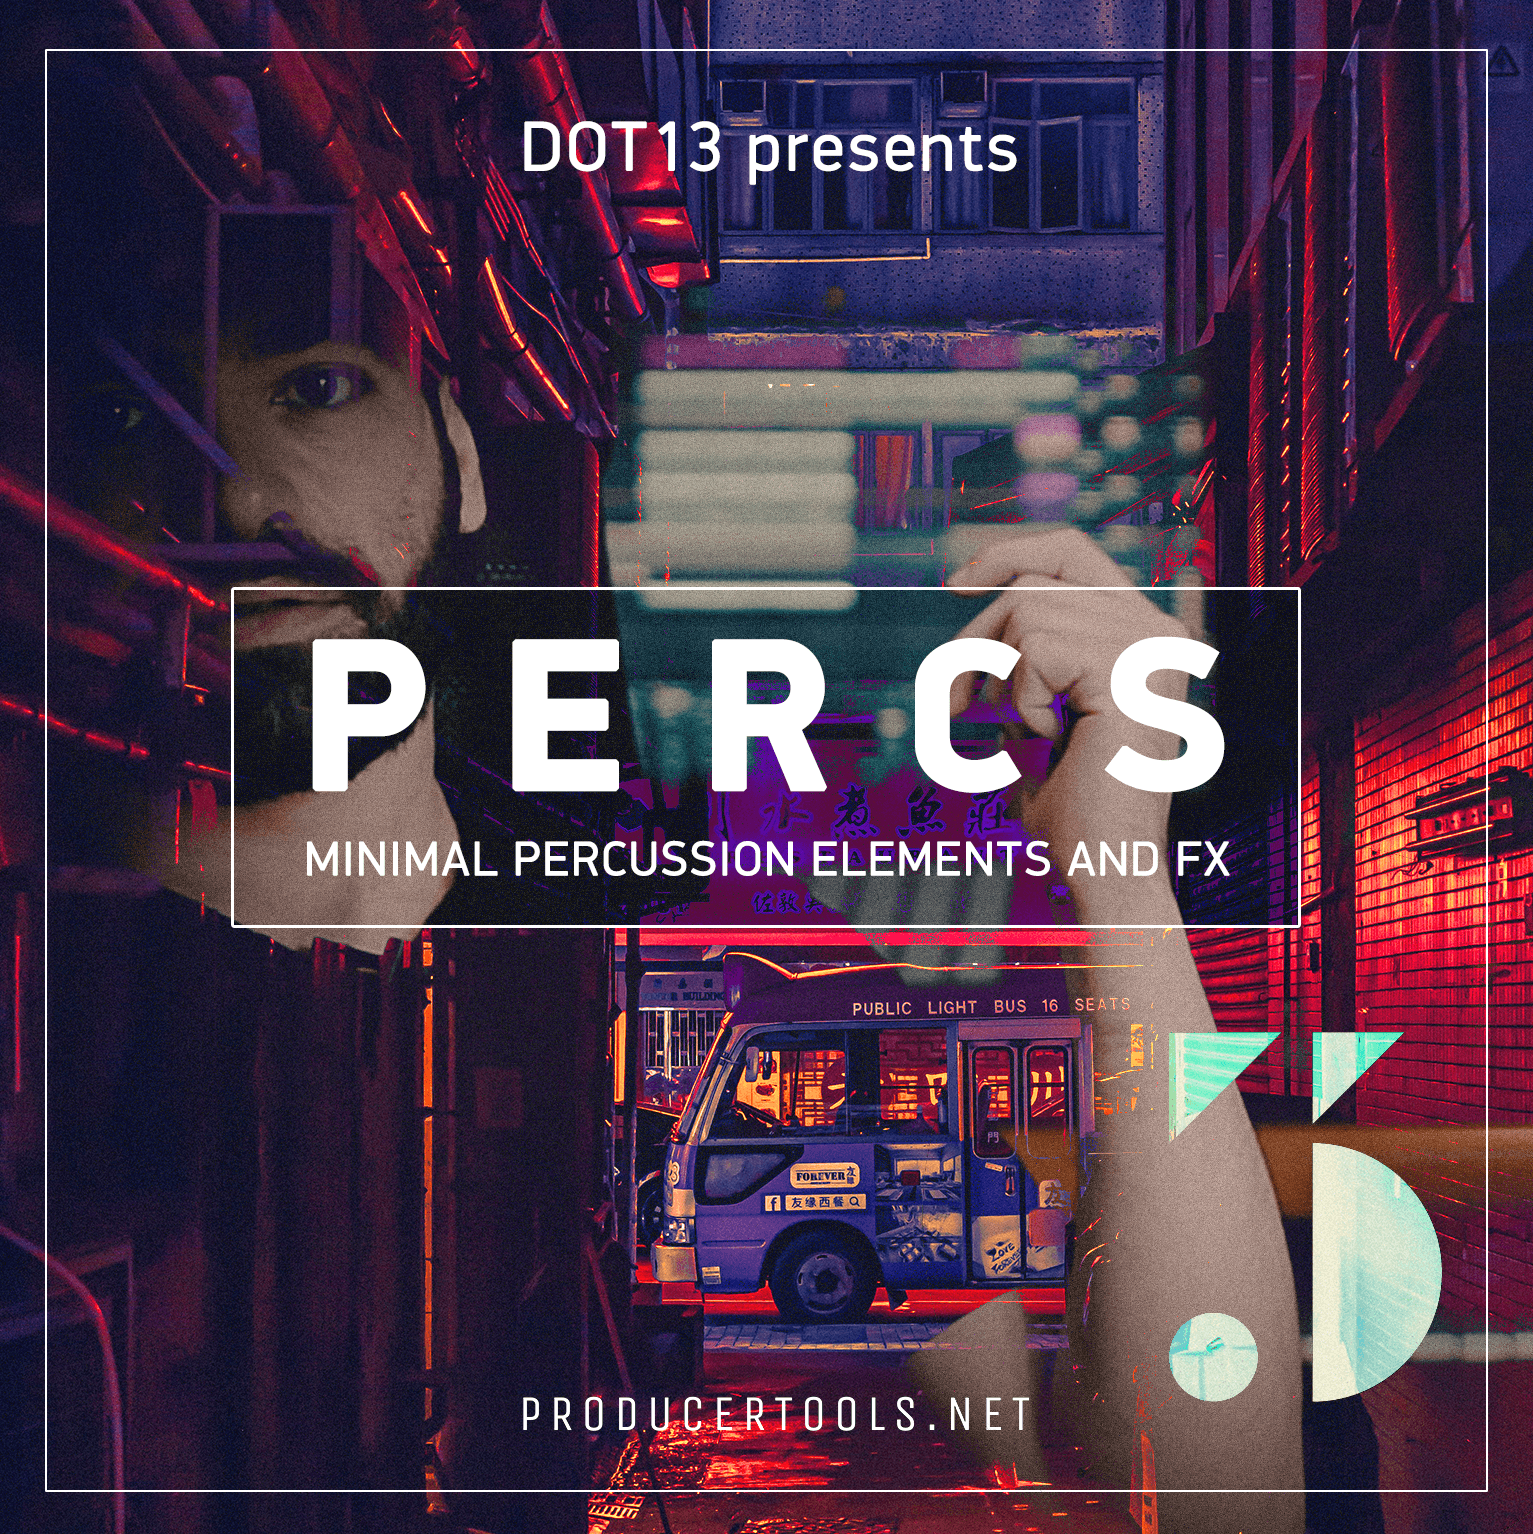 P.E.R.C.S by DOT13 - Minimal Percussions & FX - Producer Tools